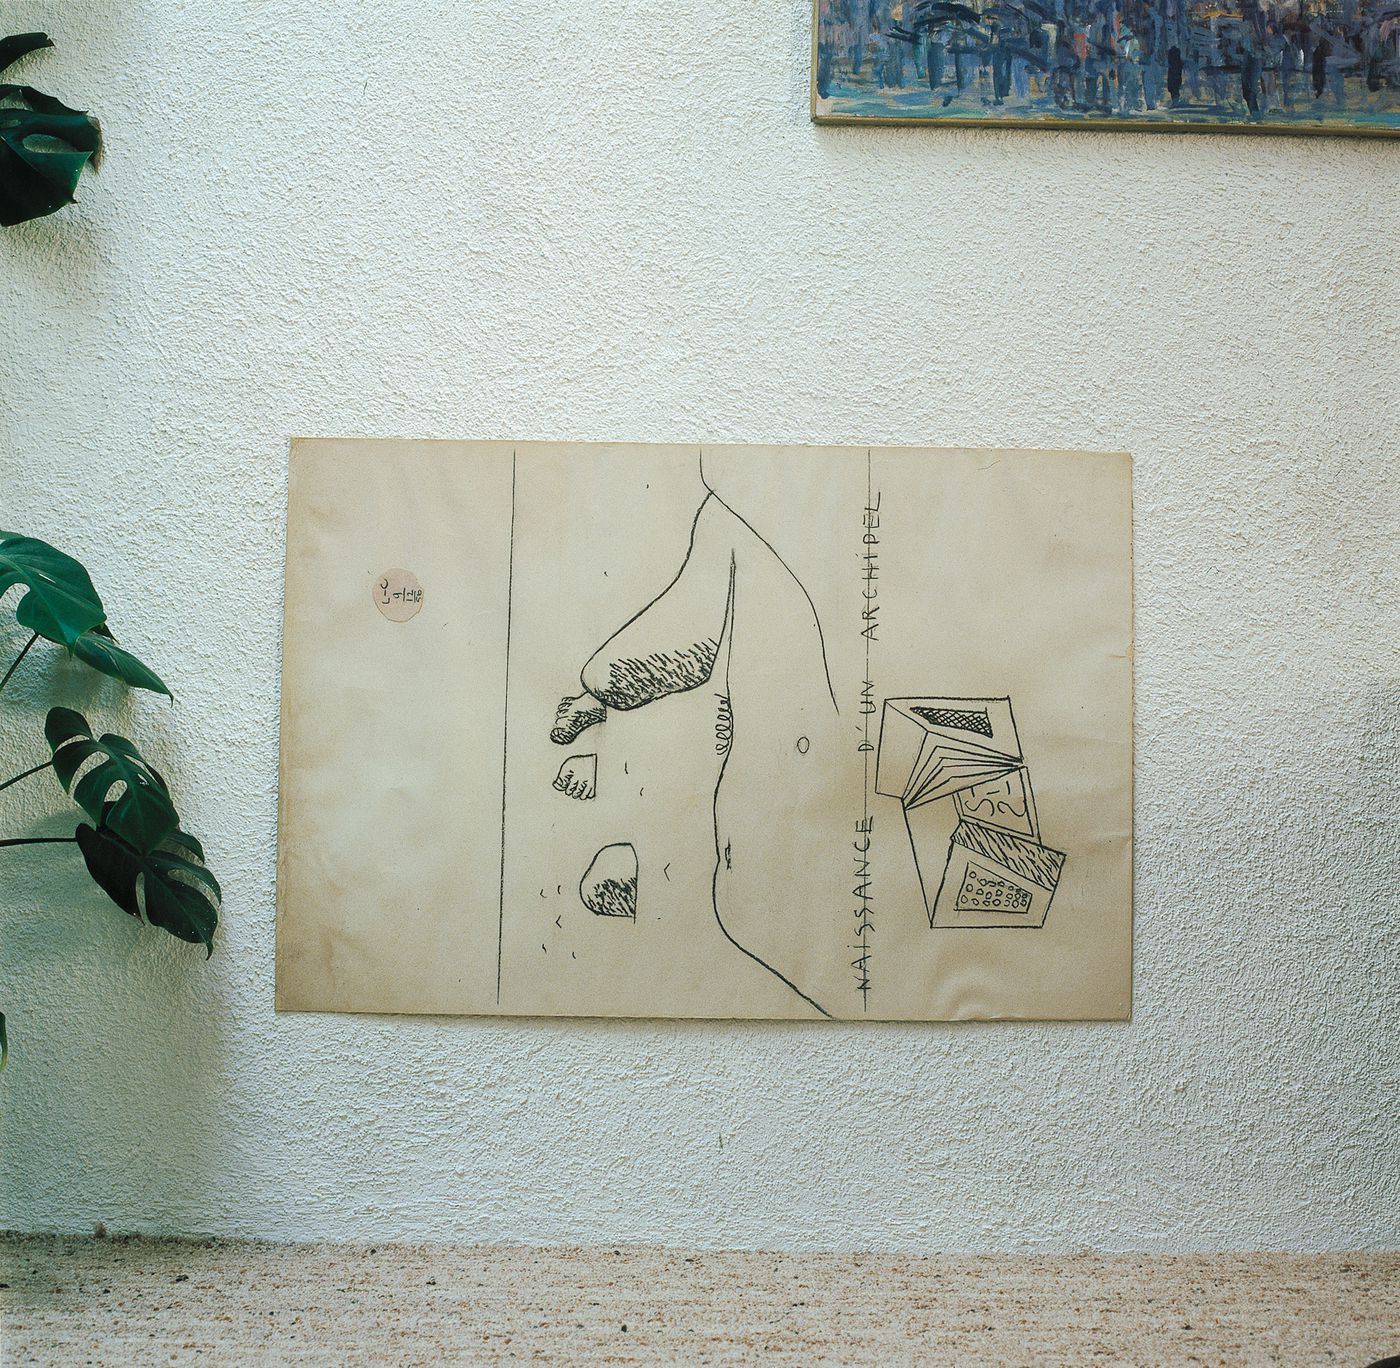 Photographs of a drawings by Le Corbusier